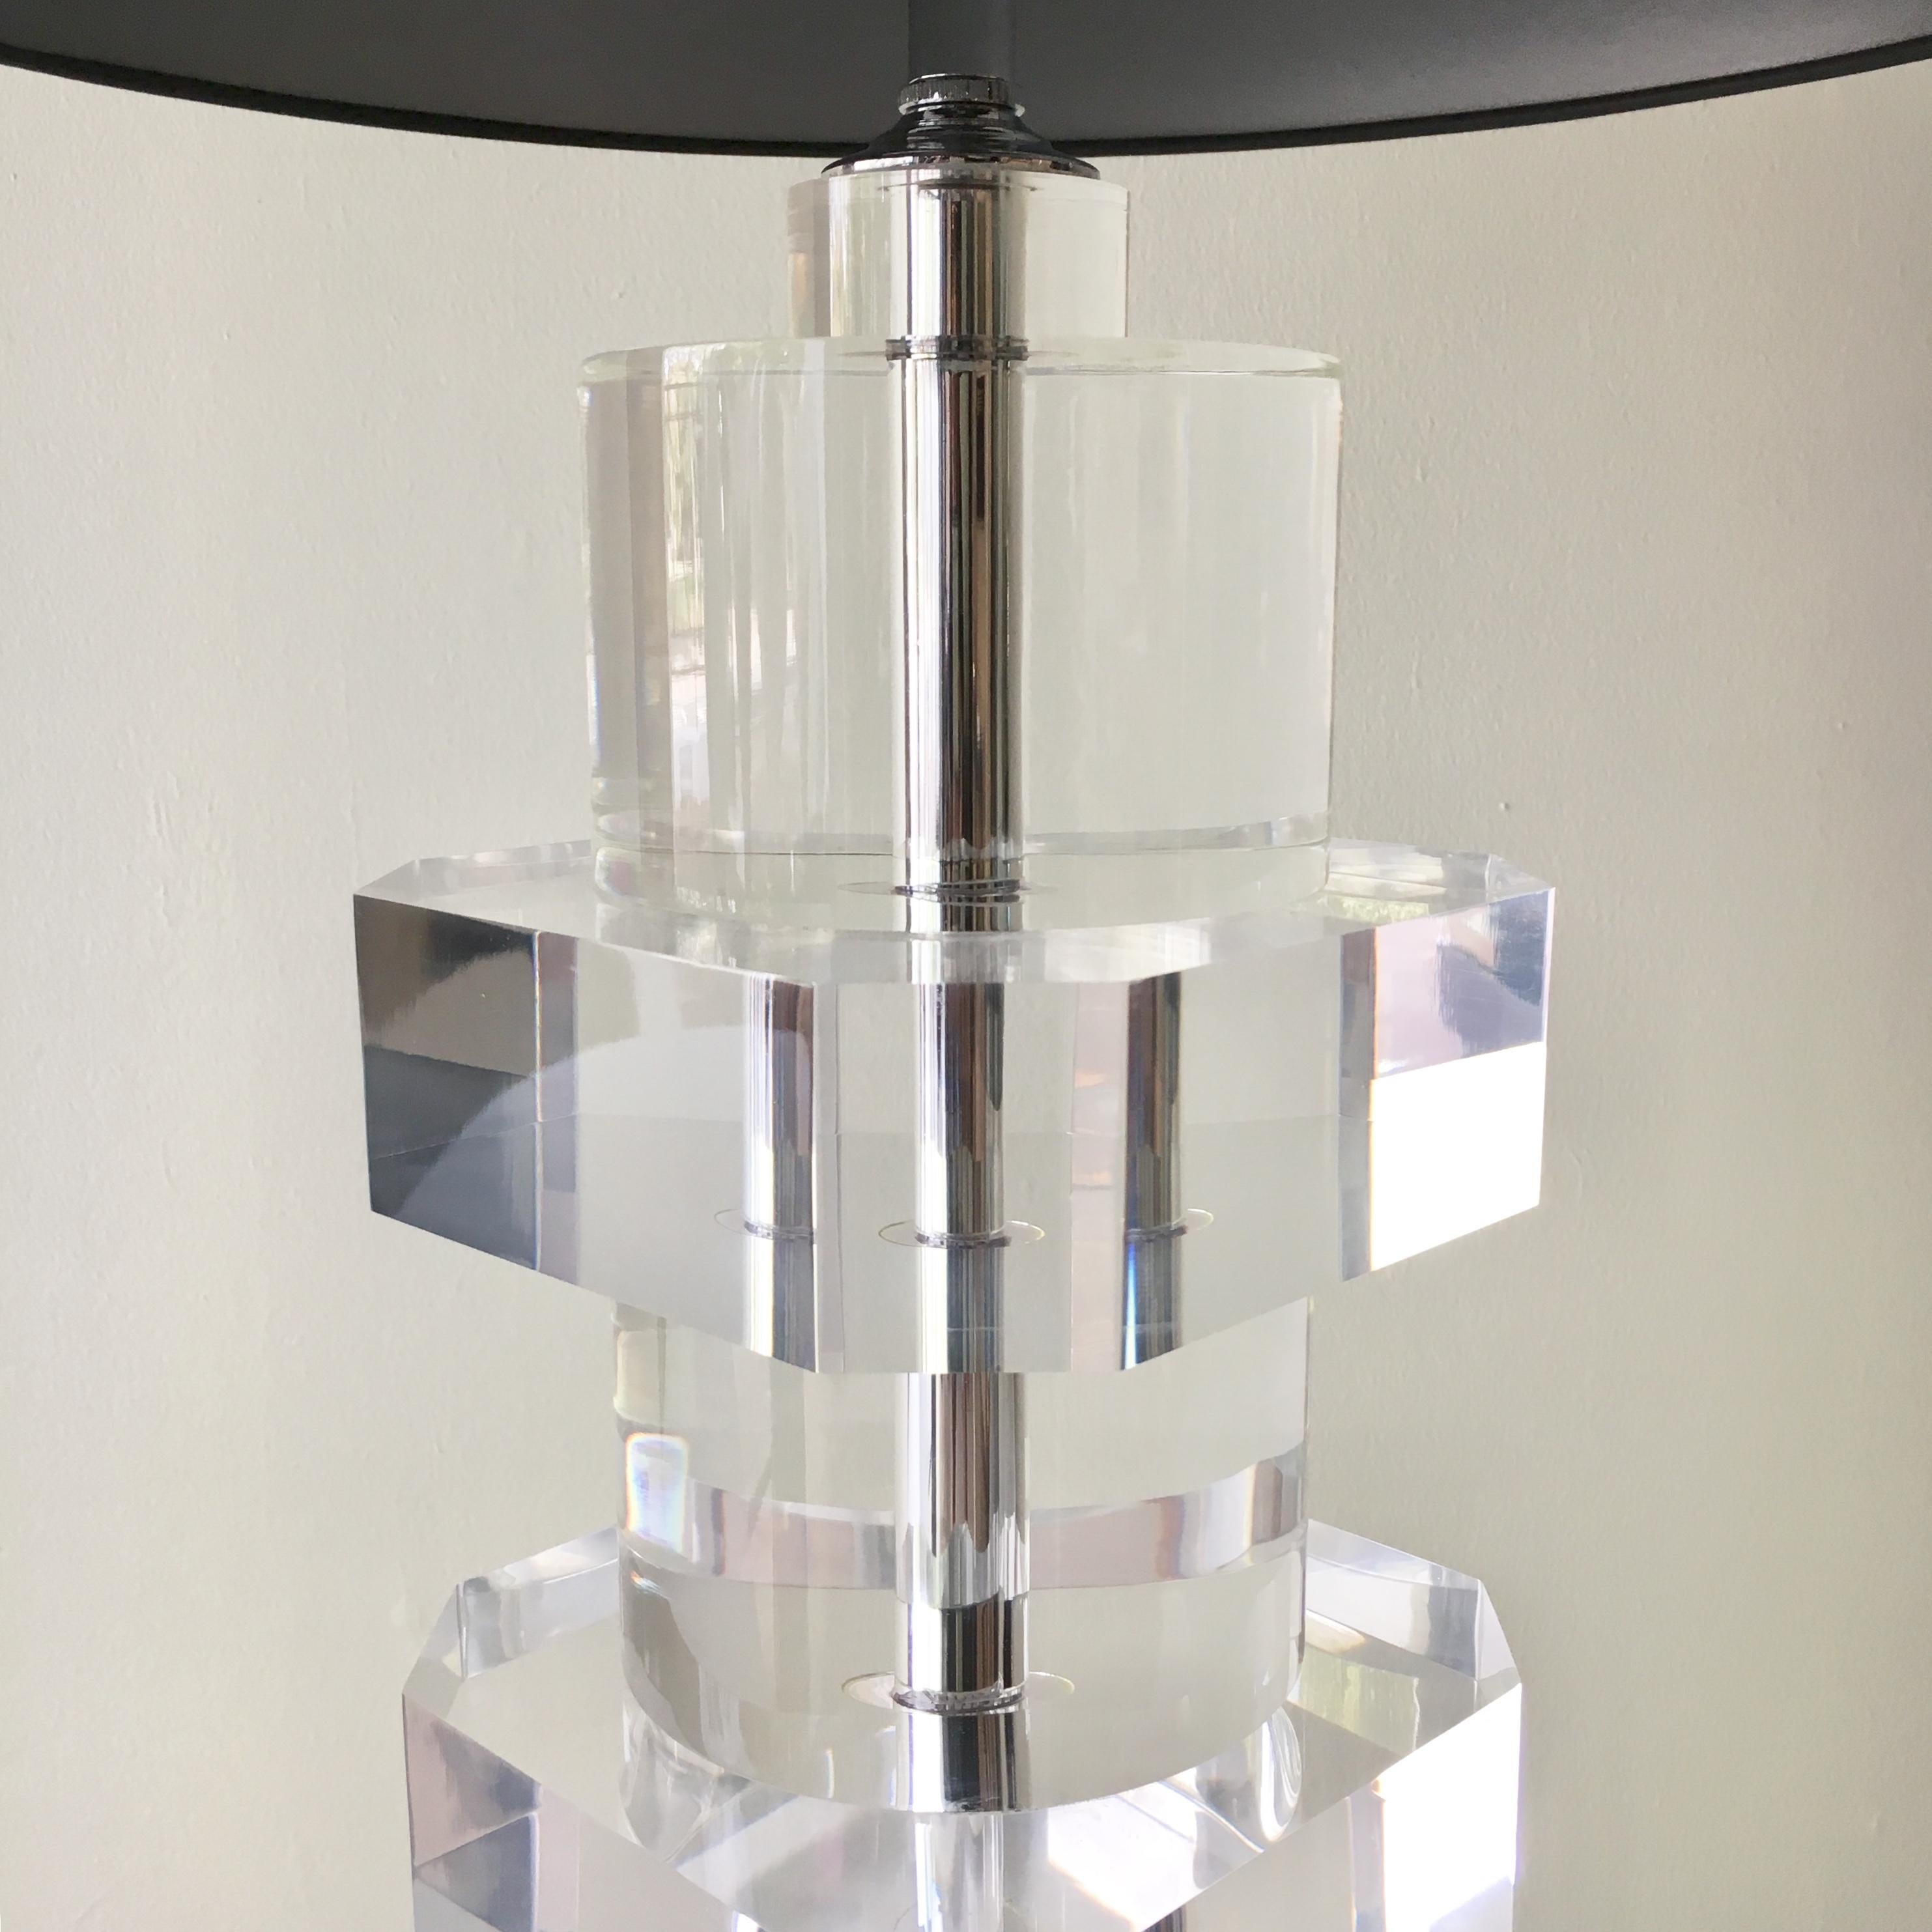 Heavy Lucite Table Lamp with Nickel Stem Detail, 1970s In Good Condition For Sale In London, GB